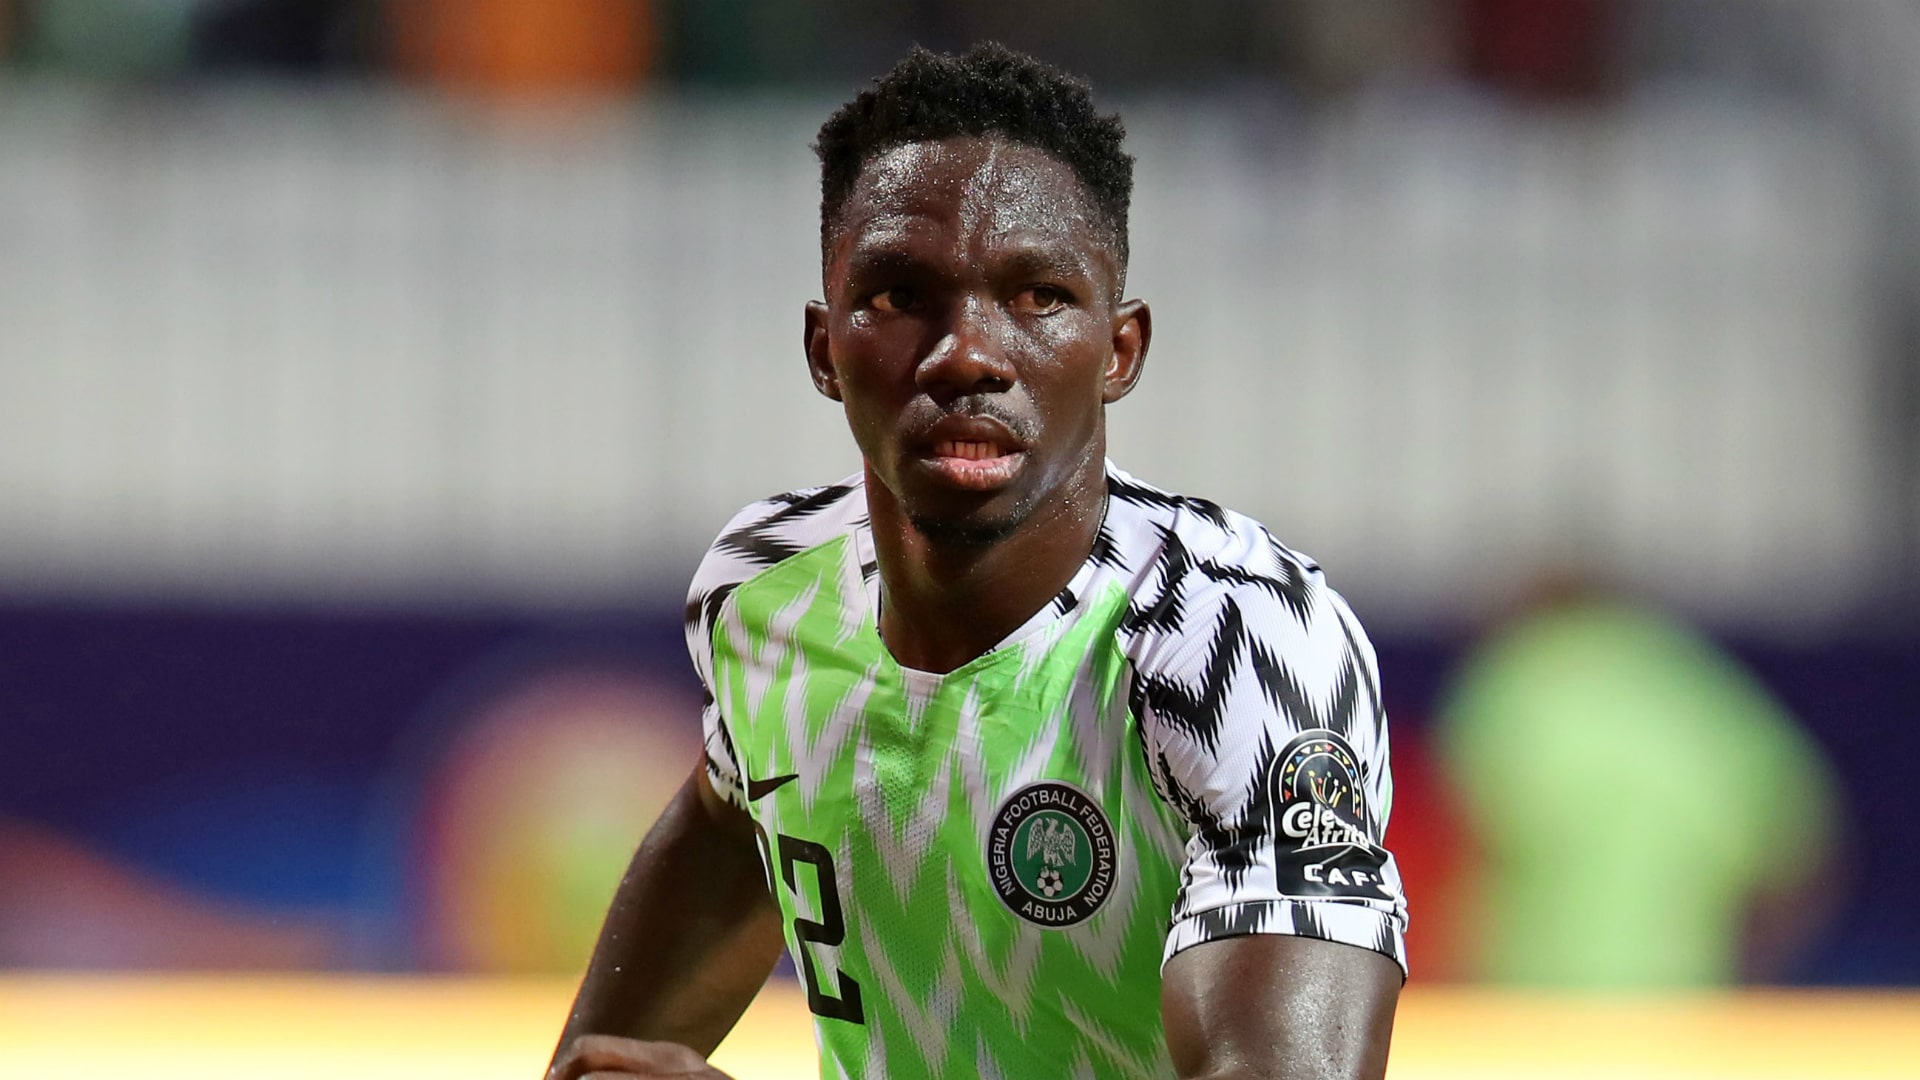 ‘I Want To Compete For Nigeria At Olympic Games’ -Omeruo